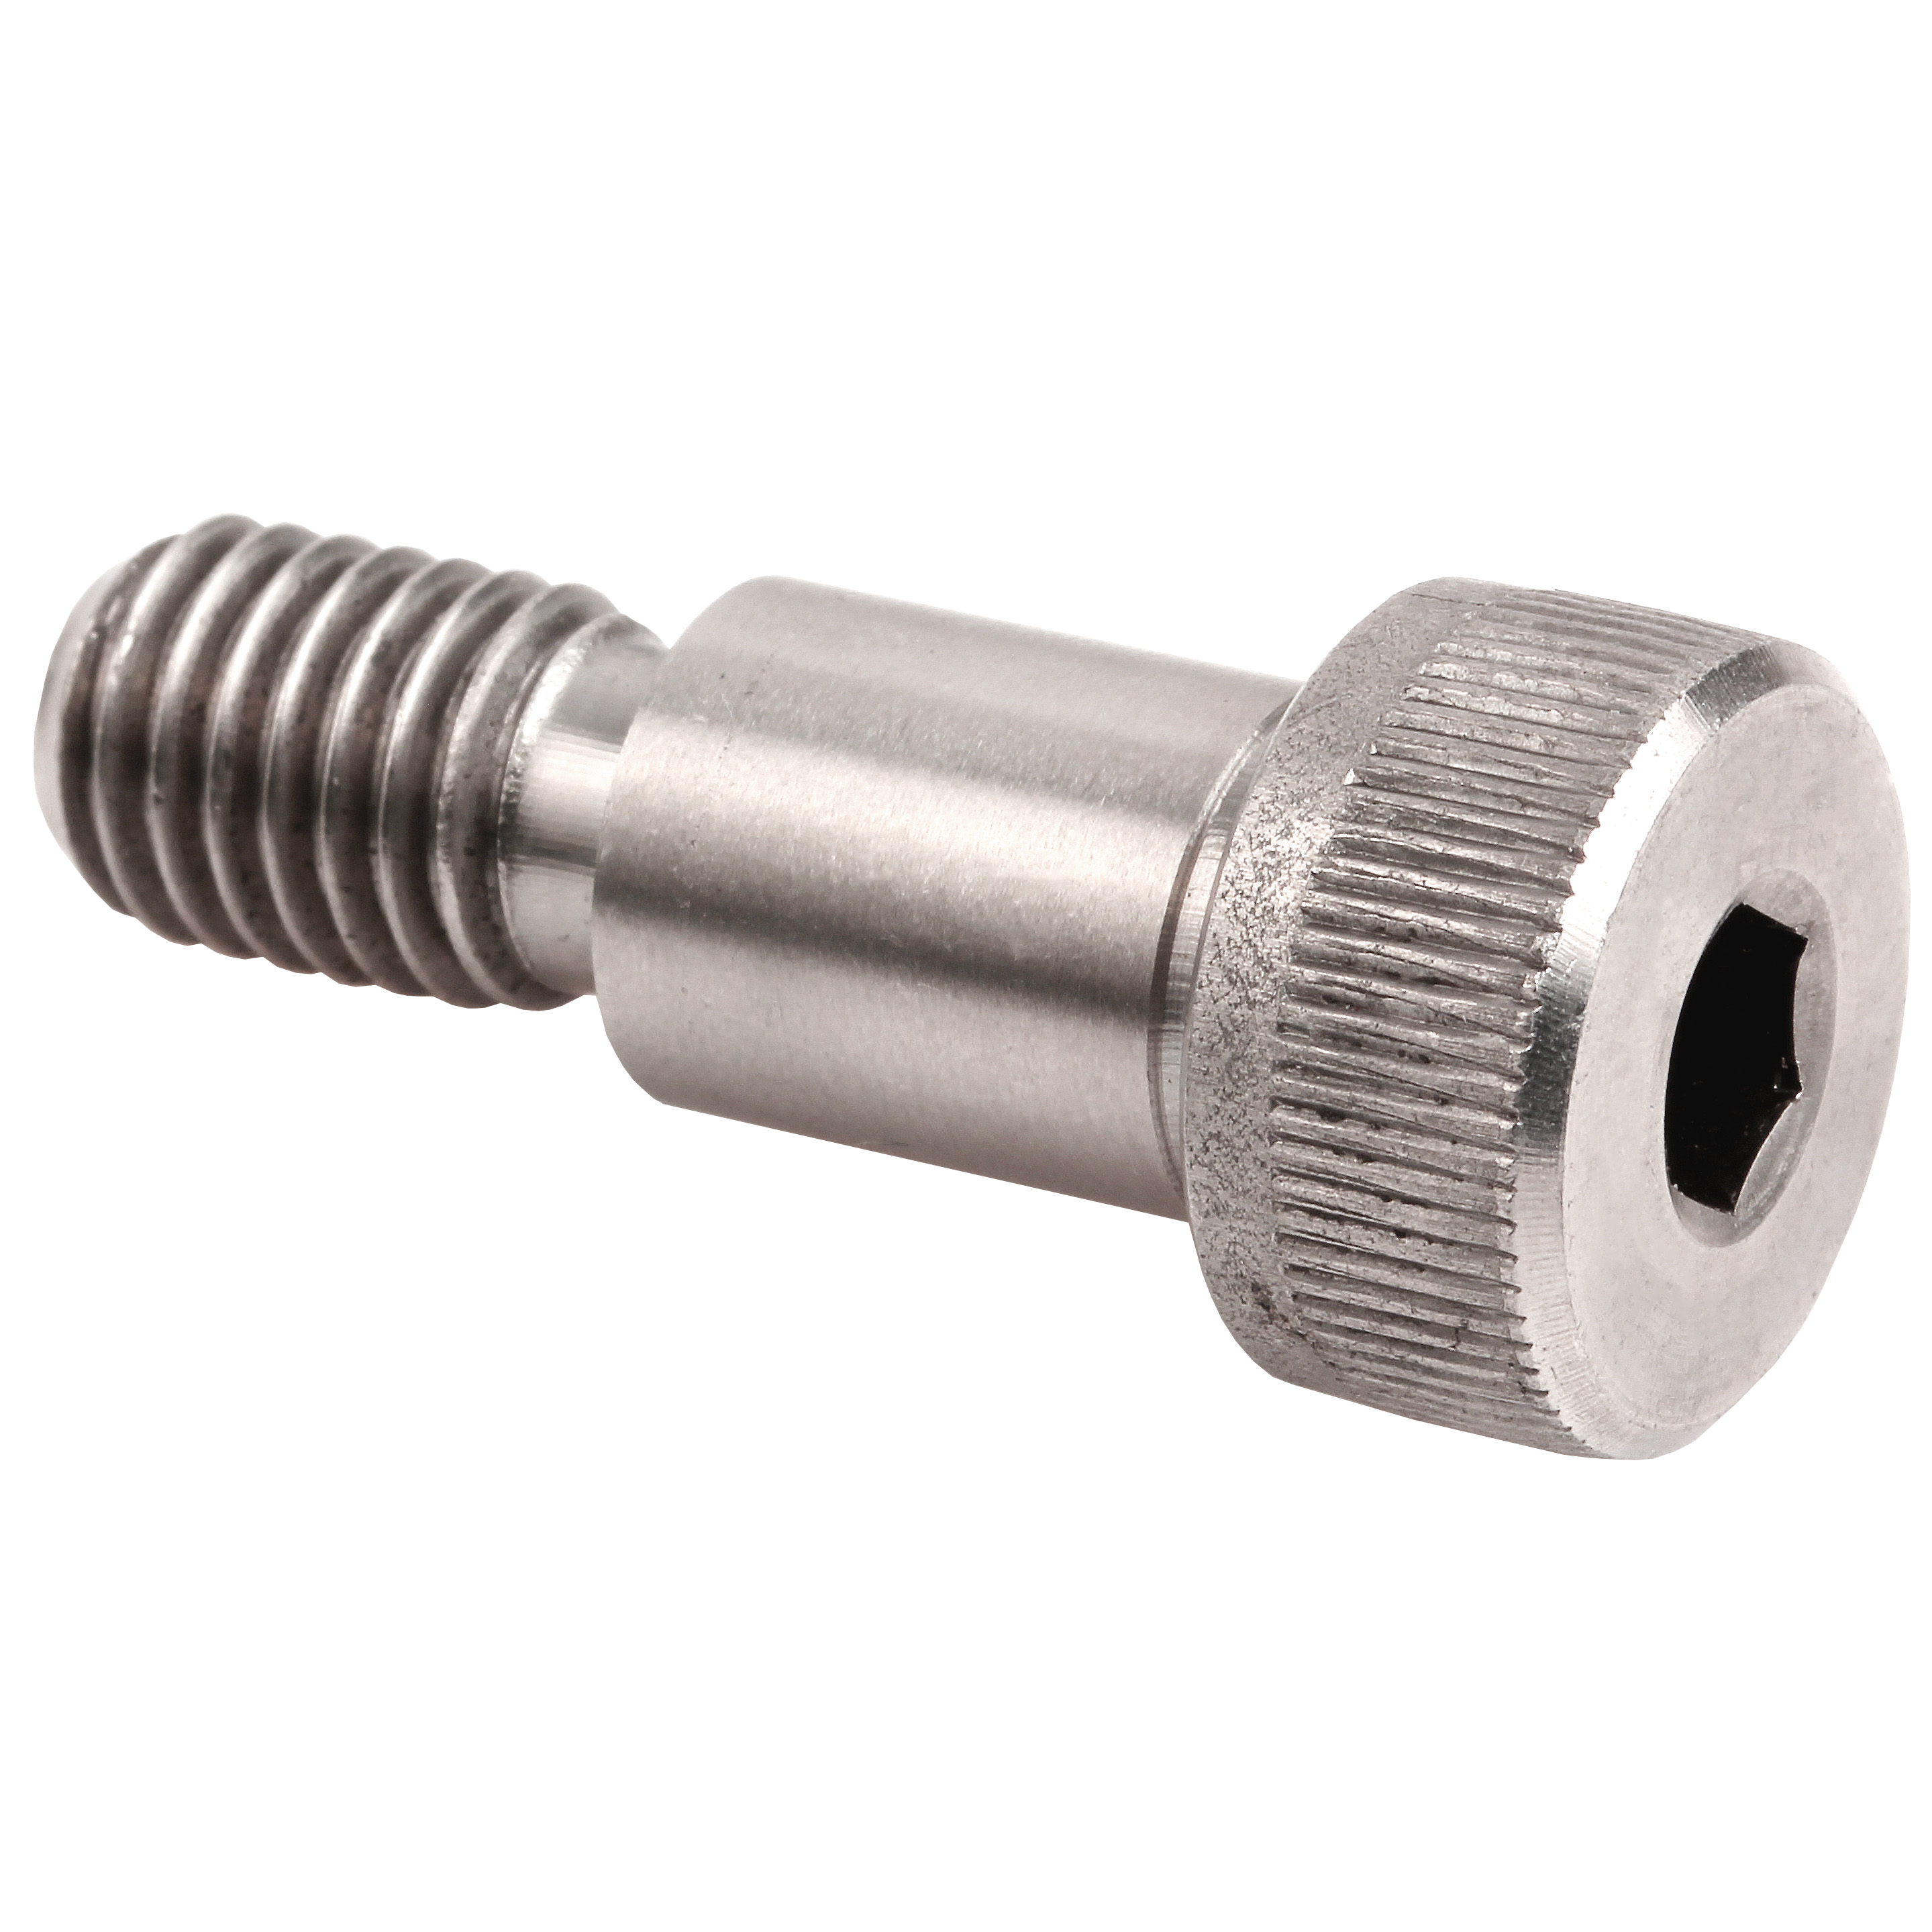 Stainless steel shoulder screw ISO7379 - Stainless steel ISO 7379 -  - 